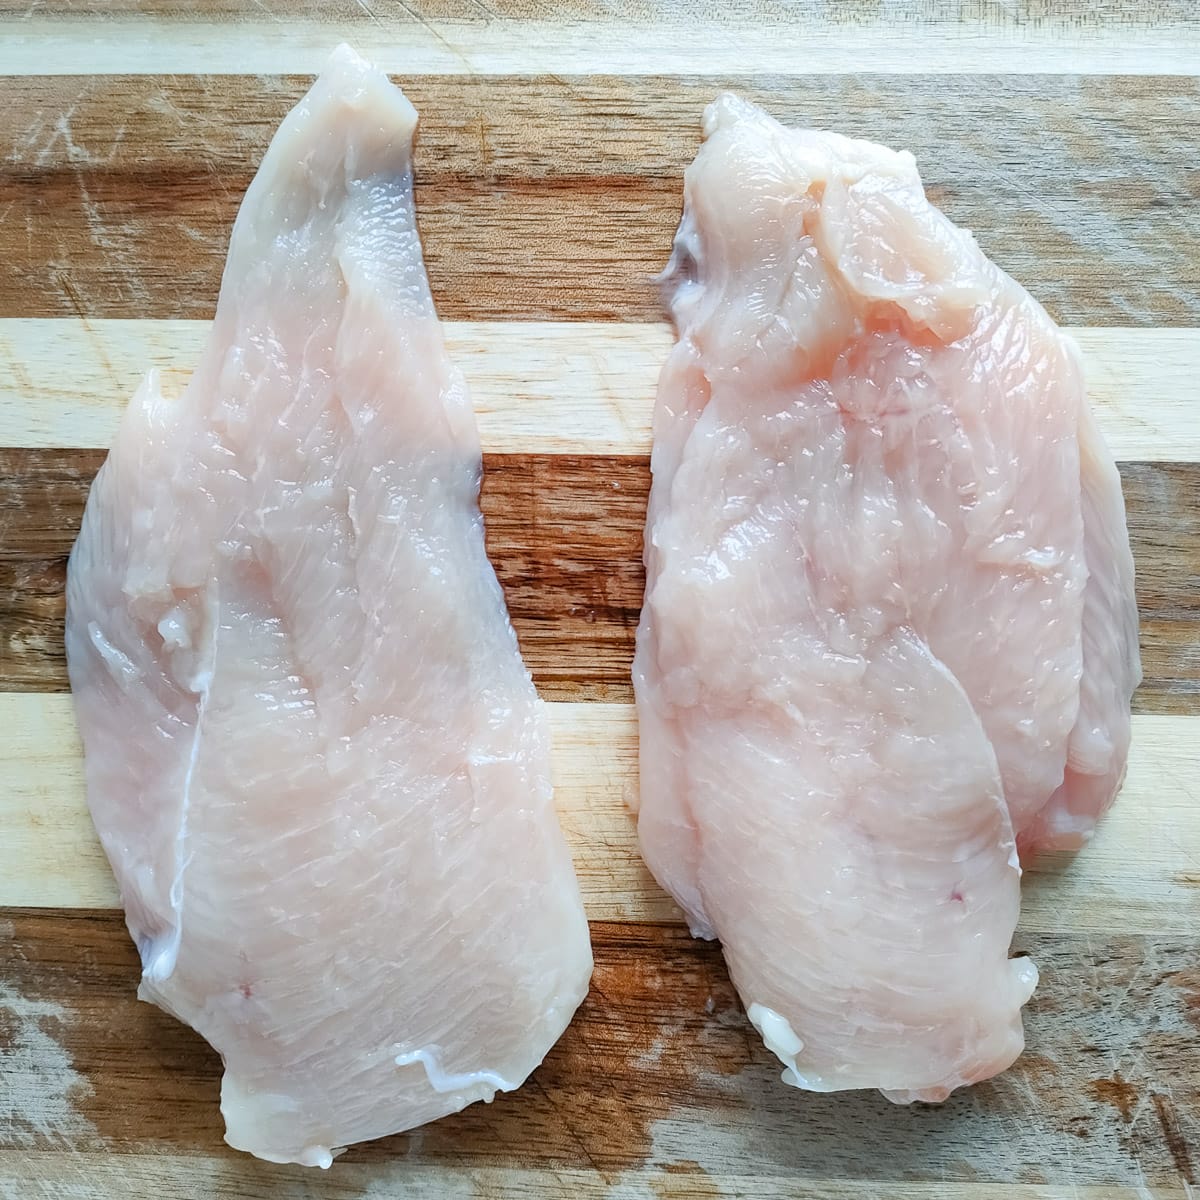 thinly sliced chicken breast on a chopping board.